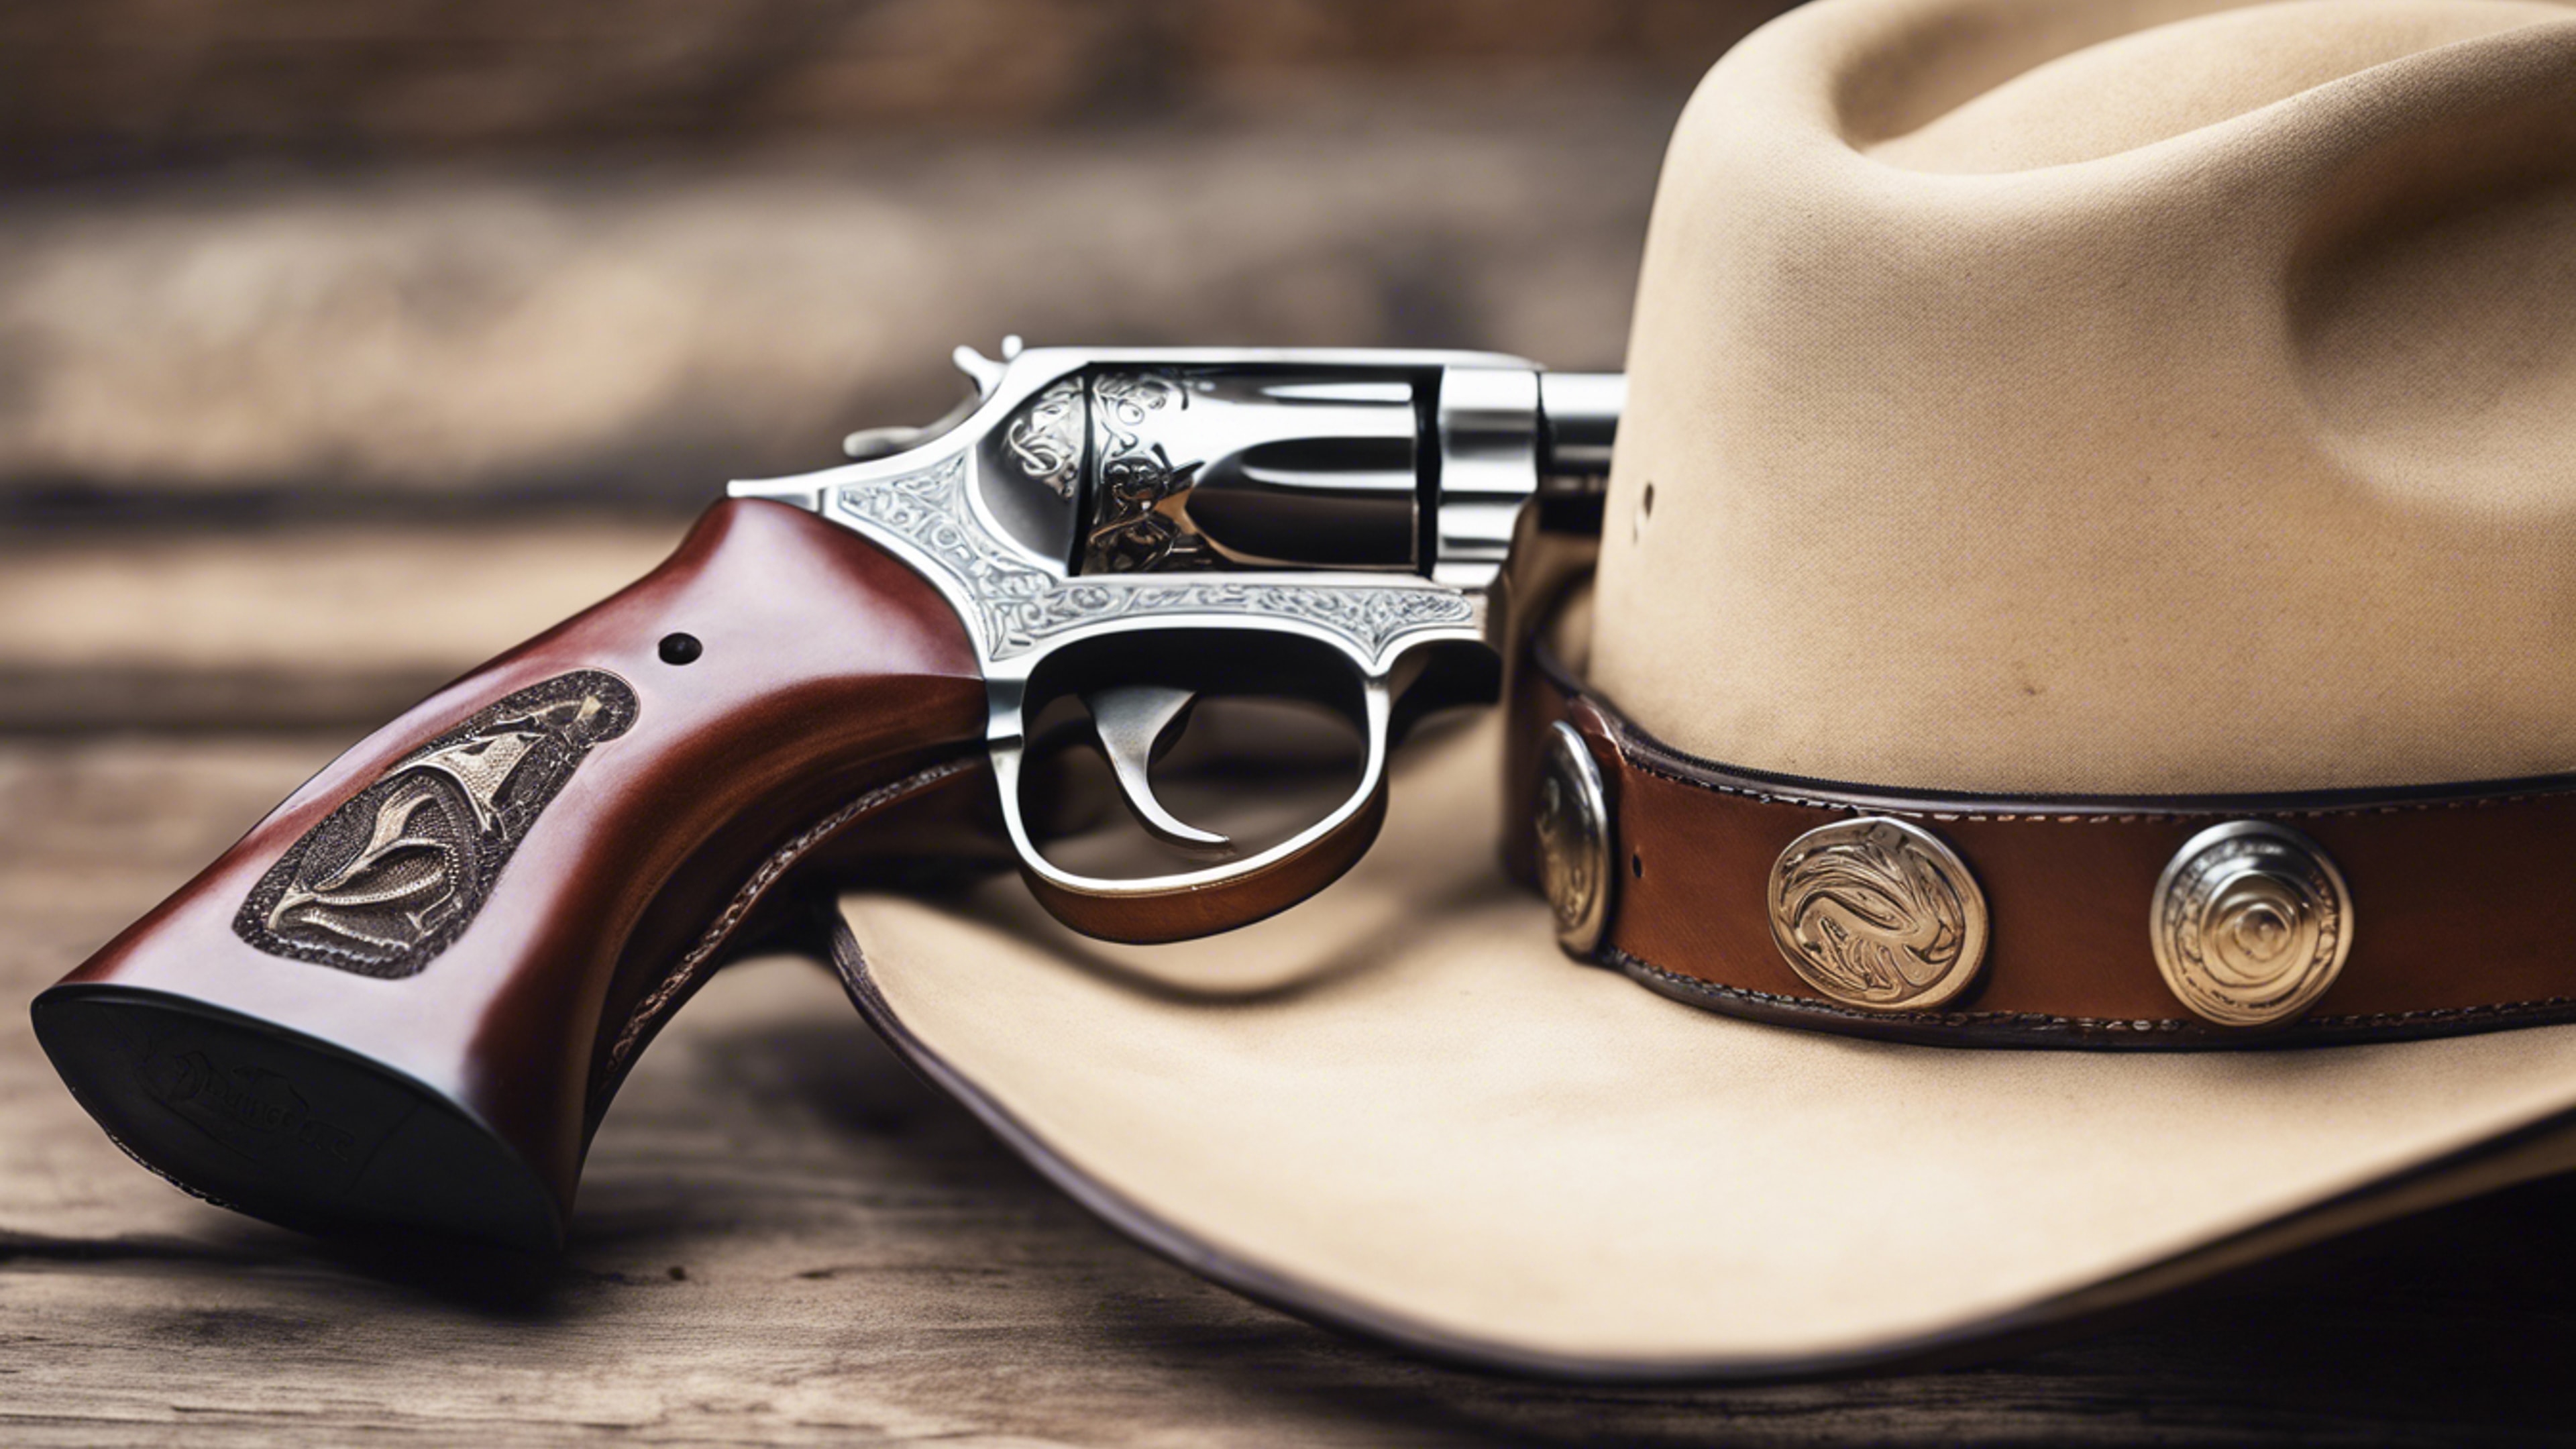 A detailed close-up of a cowboy hat, spurs, and a leather holster with a revolver. Tapet[6dbcb72083d24ad78673]